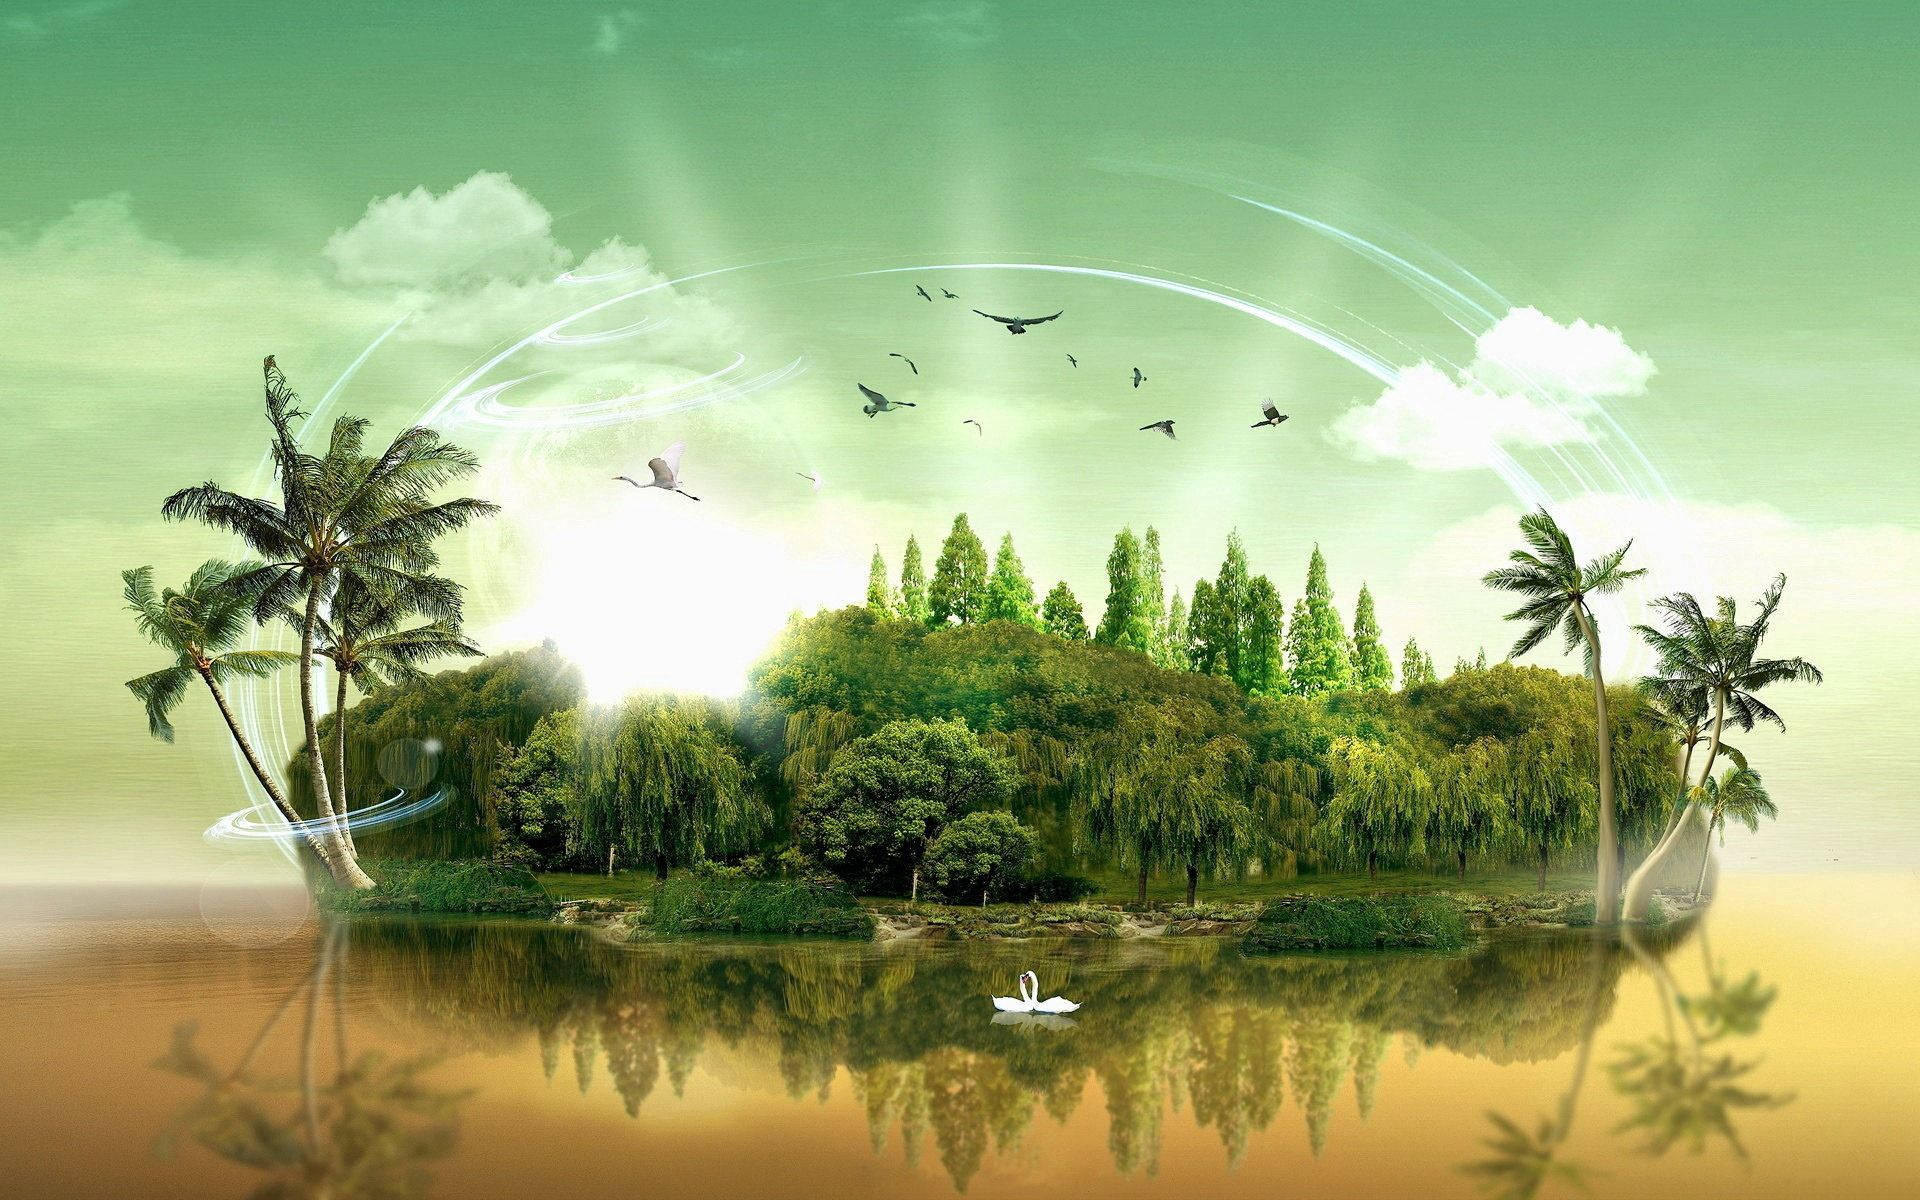 Get lost in the serene beauty of Fantasy Island Wallpaper